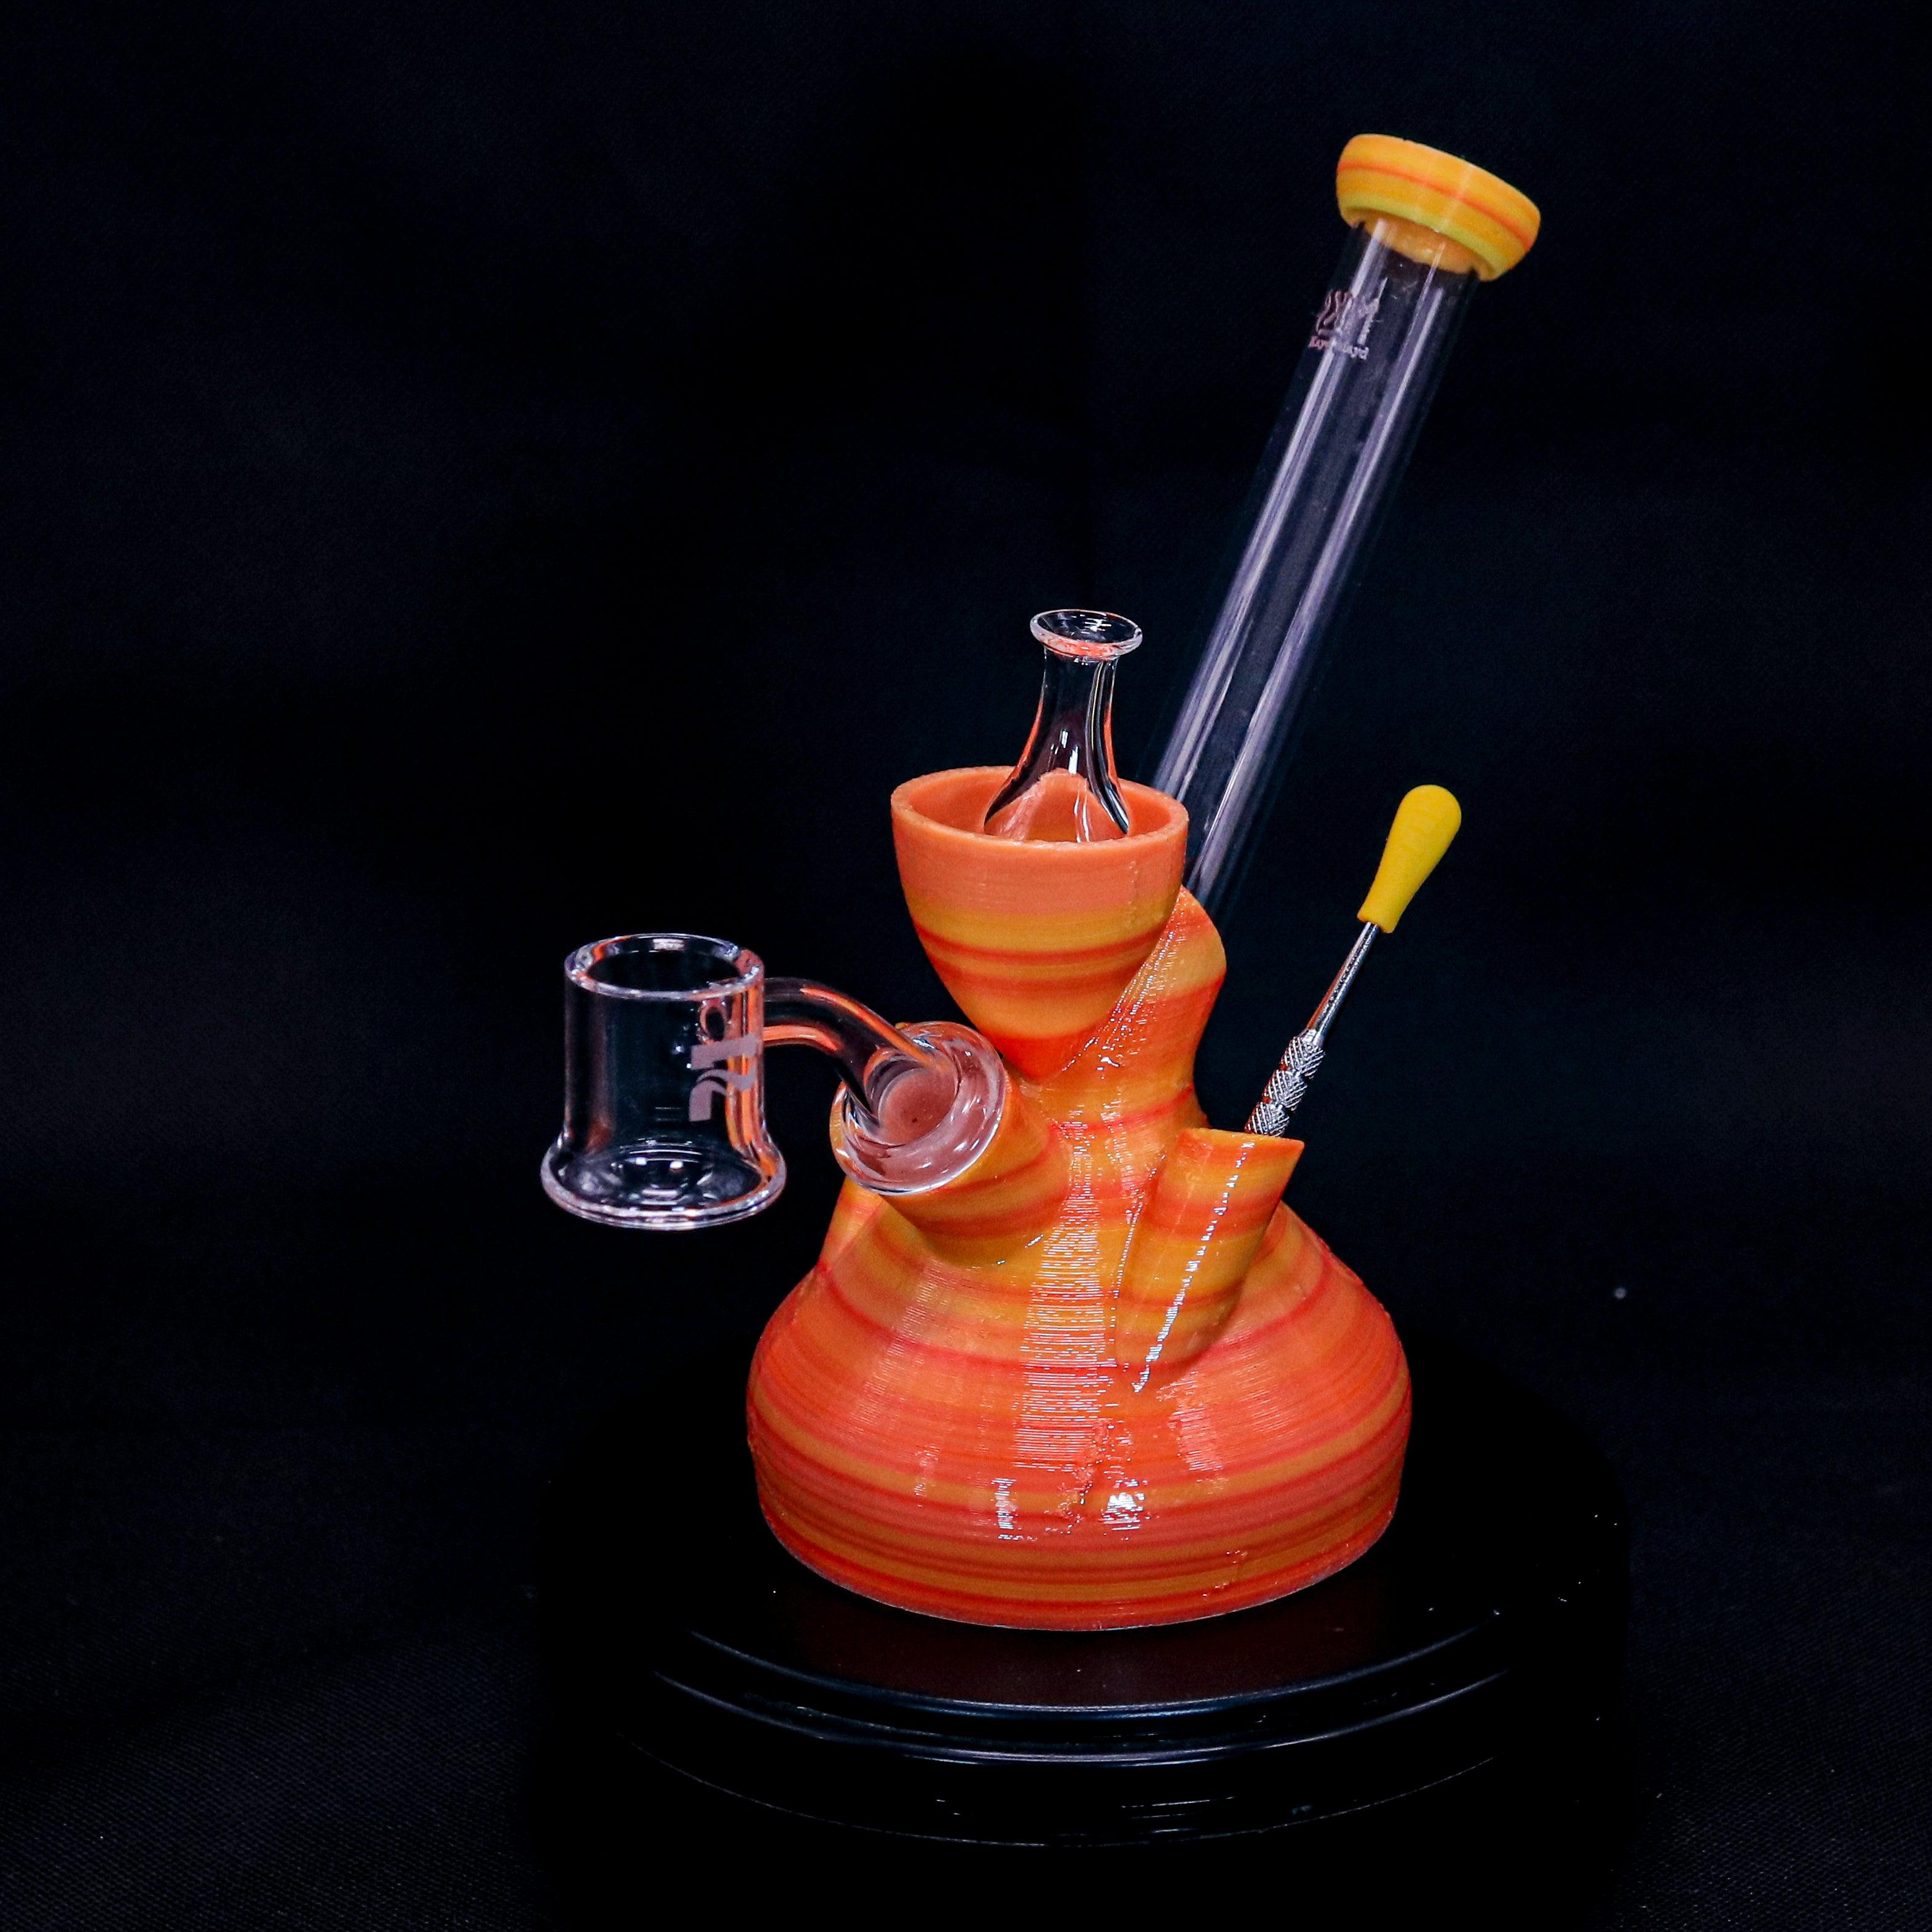 orange and yellow unbreakable shatterproof Dab Rig with quartz banger, dab tool and glass carb cap